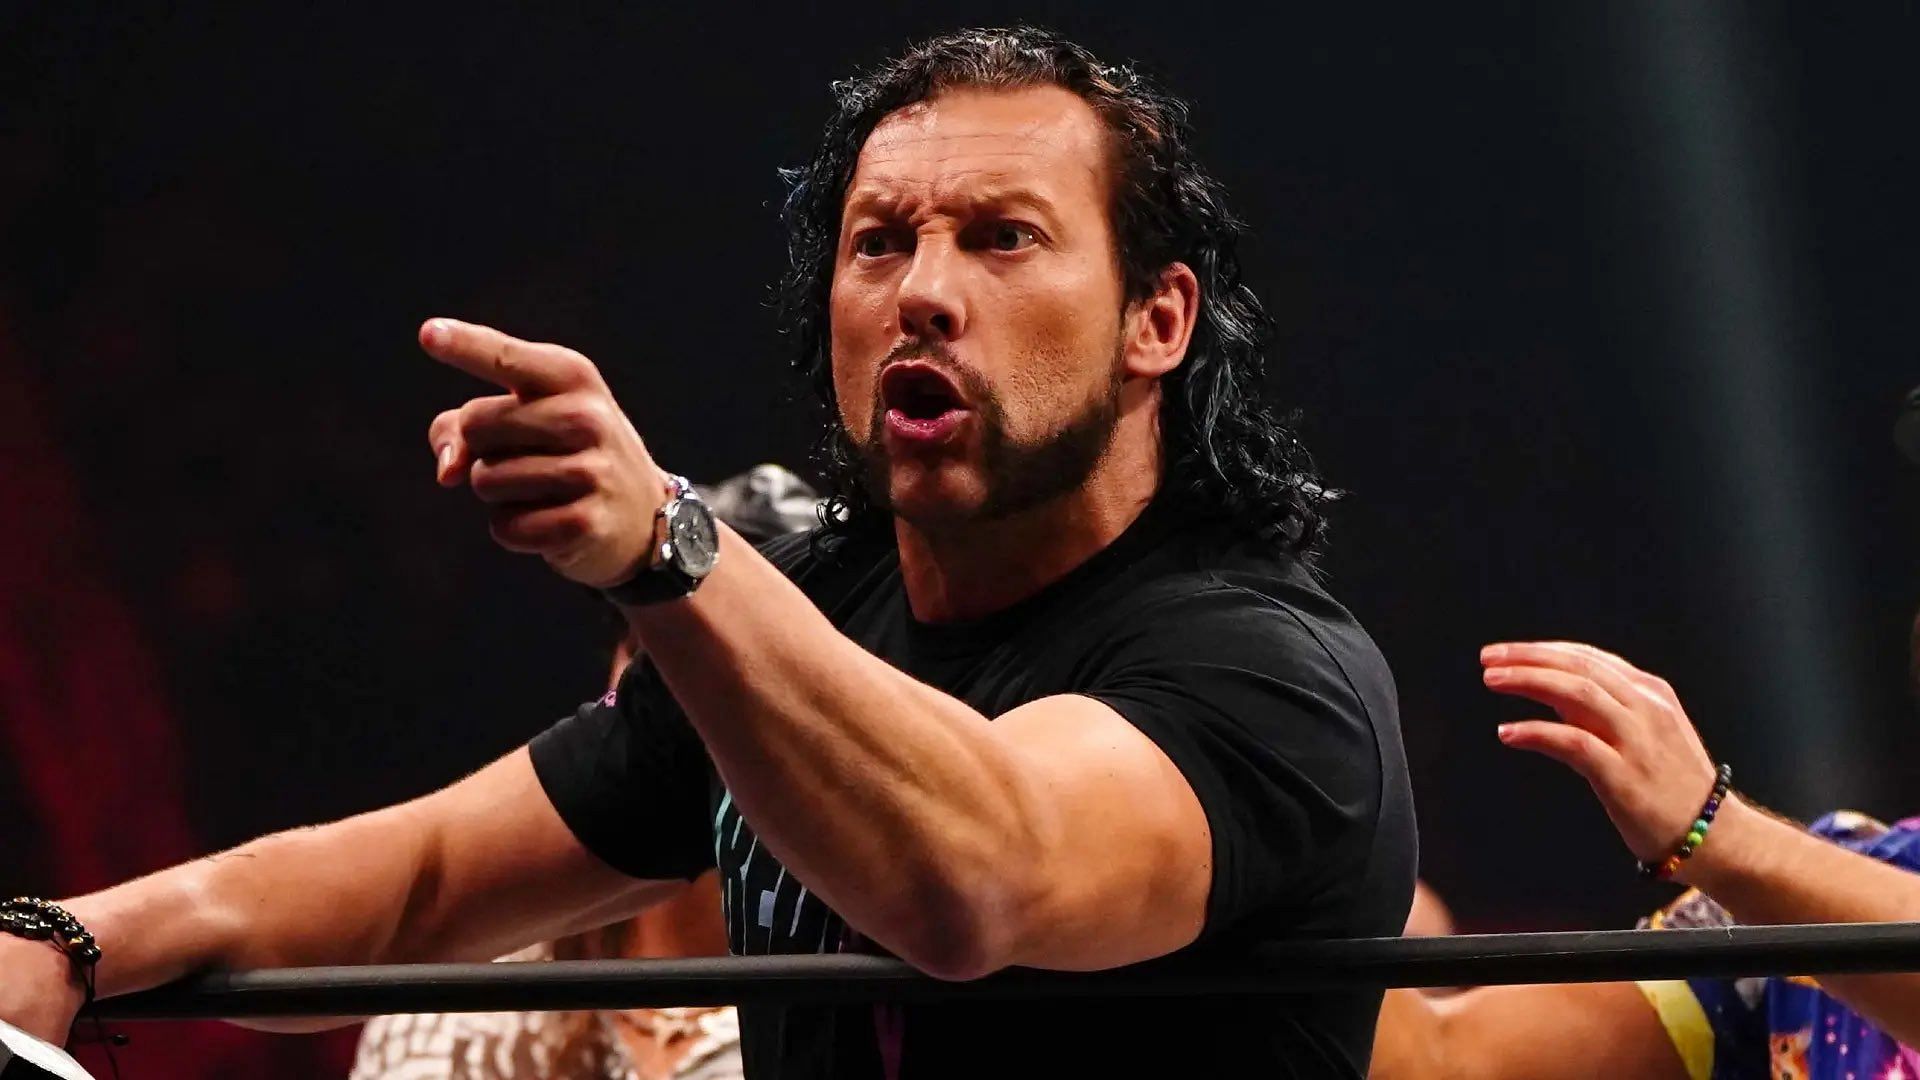 What went wrong with a recent spot featuring Kenny Omega?